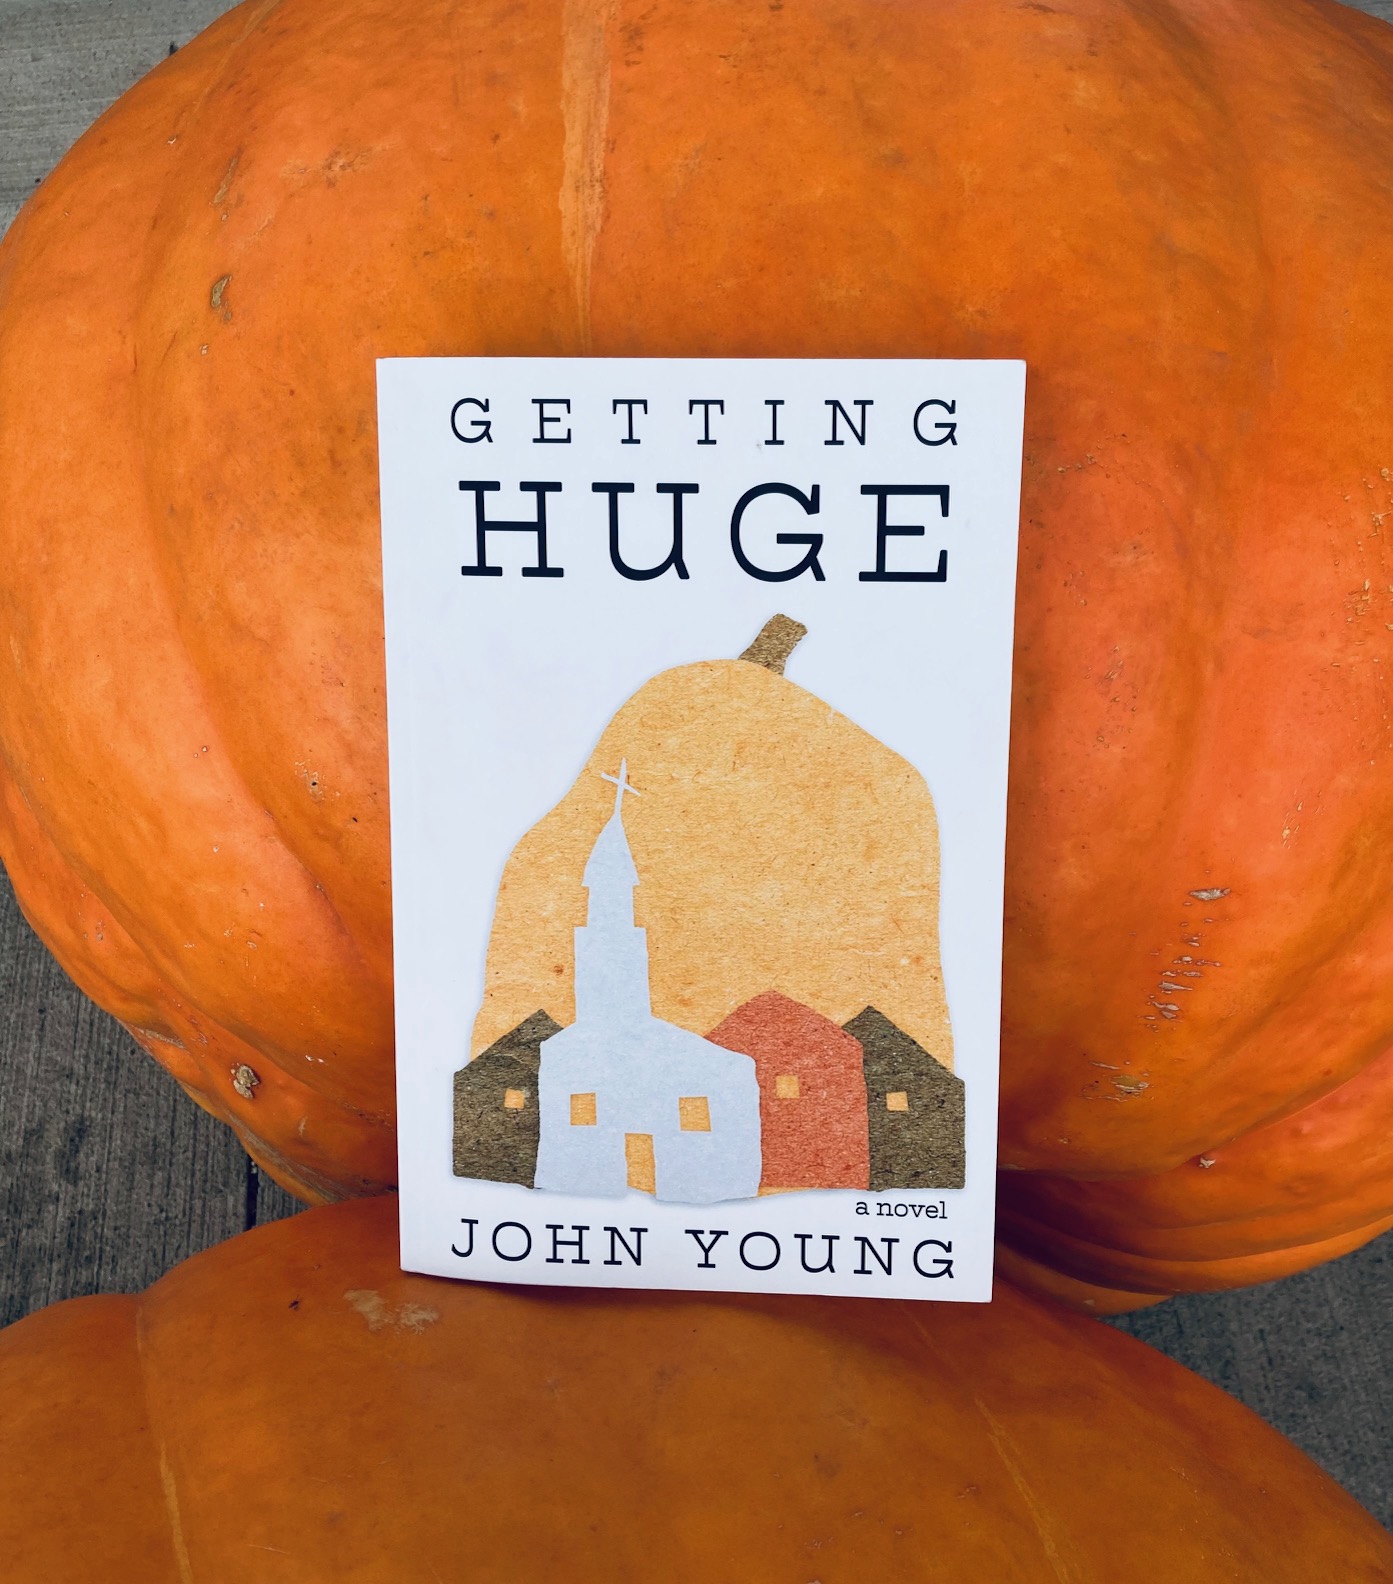 Getting Huge by John Young book pictured with large pumpkins